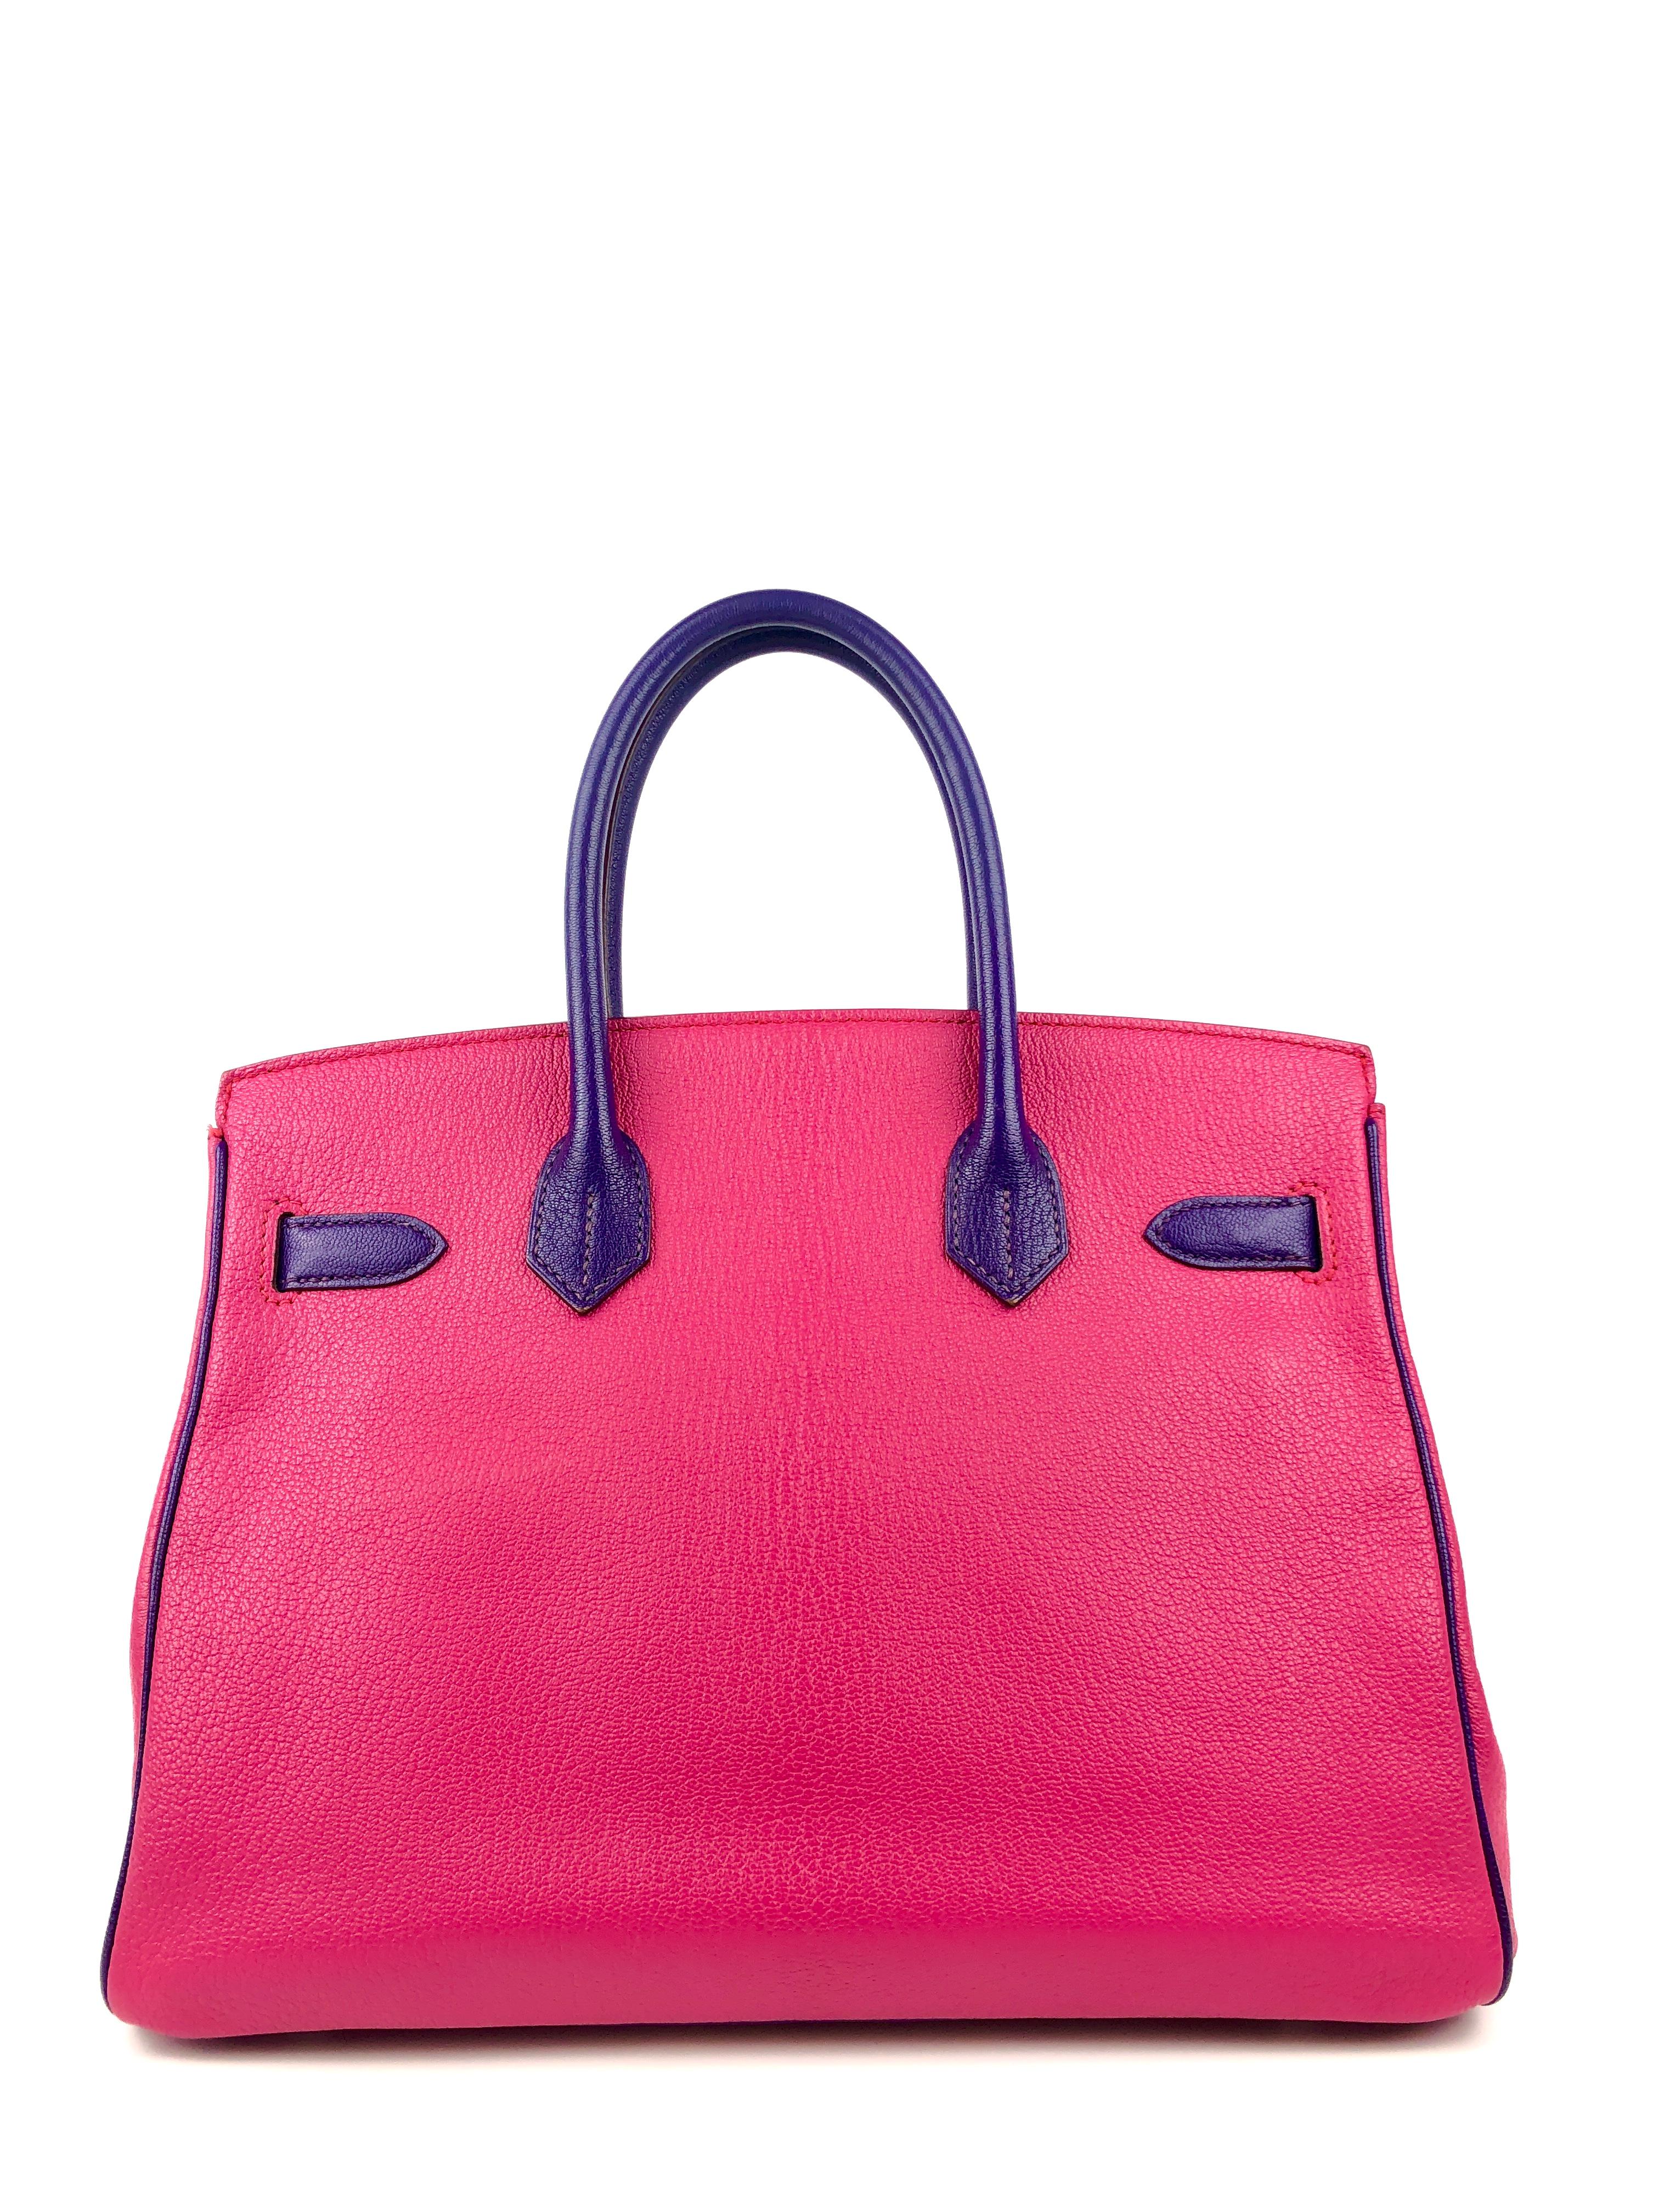 This authentic Hermès Rose Extreme and Iris Chevre Horseshoe Birkin is in pristine condition.  Specially ordered as indicated by the horseshoe stamp, this special Birkin is one-of-a-kind.
Shocking pink chevre leather (goat hide) is extremely durable